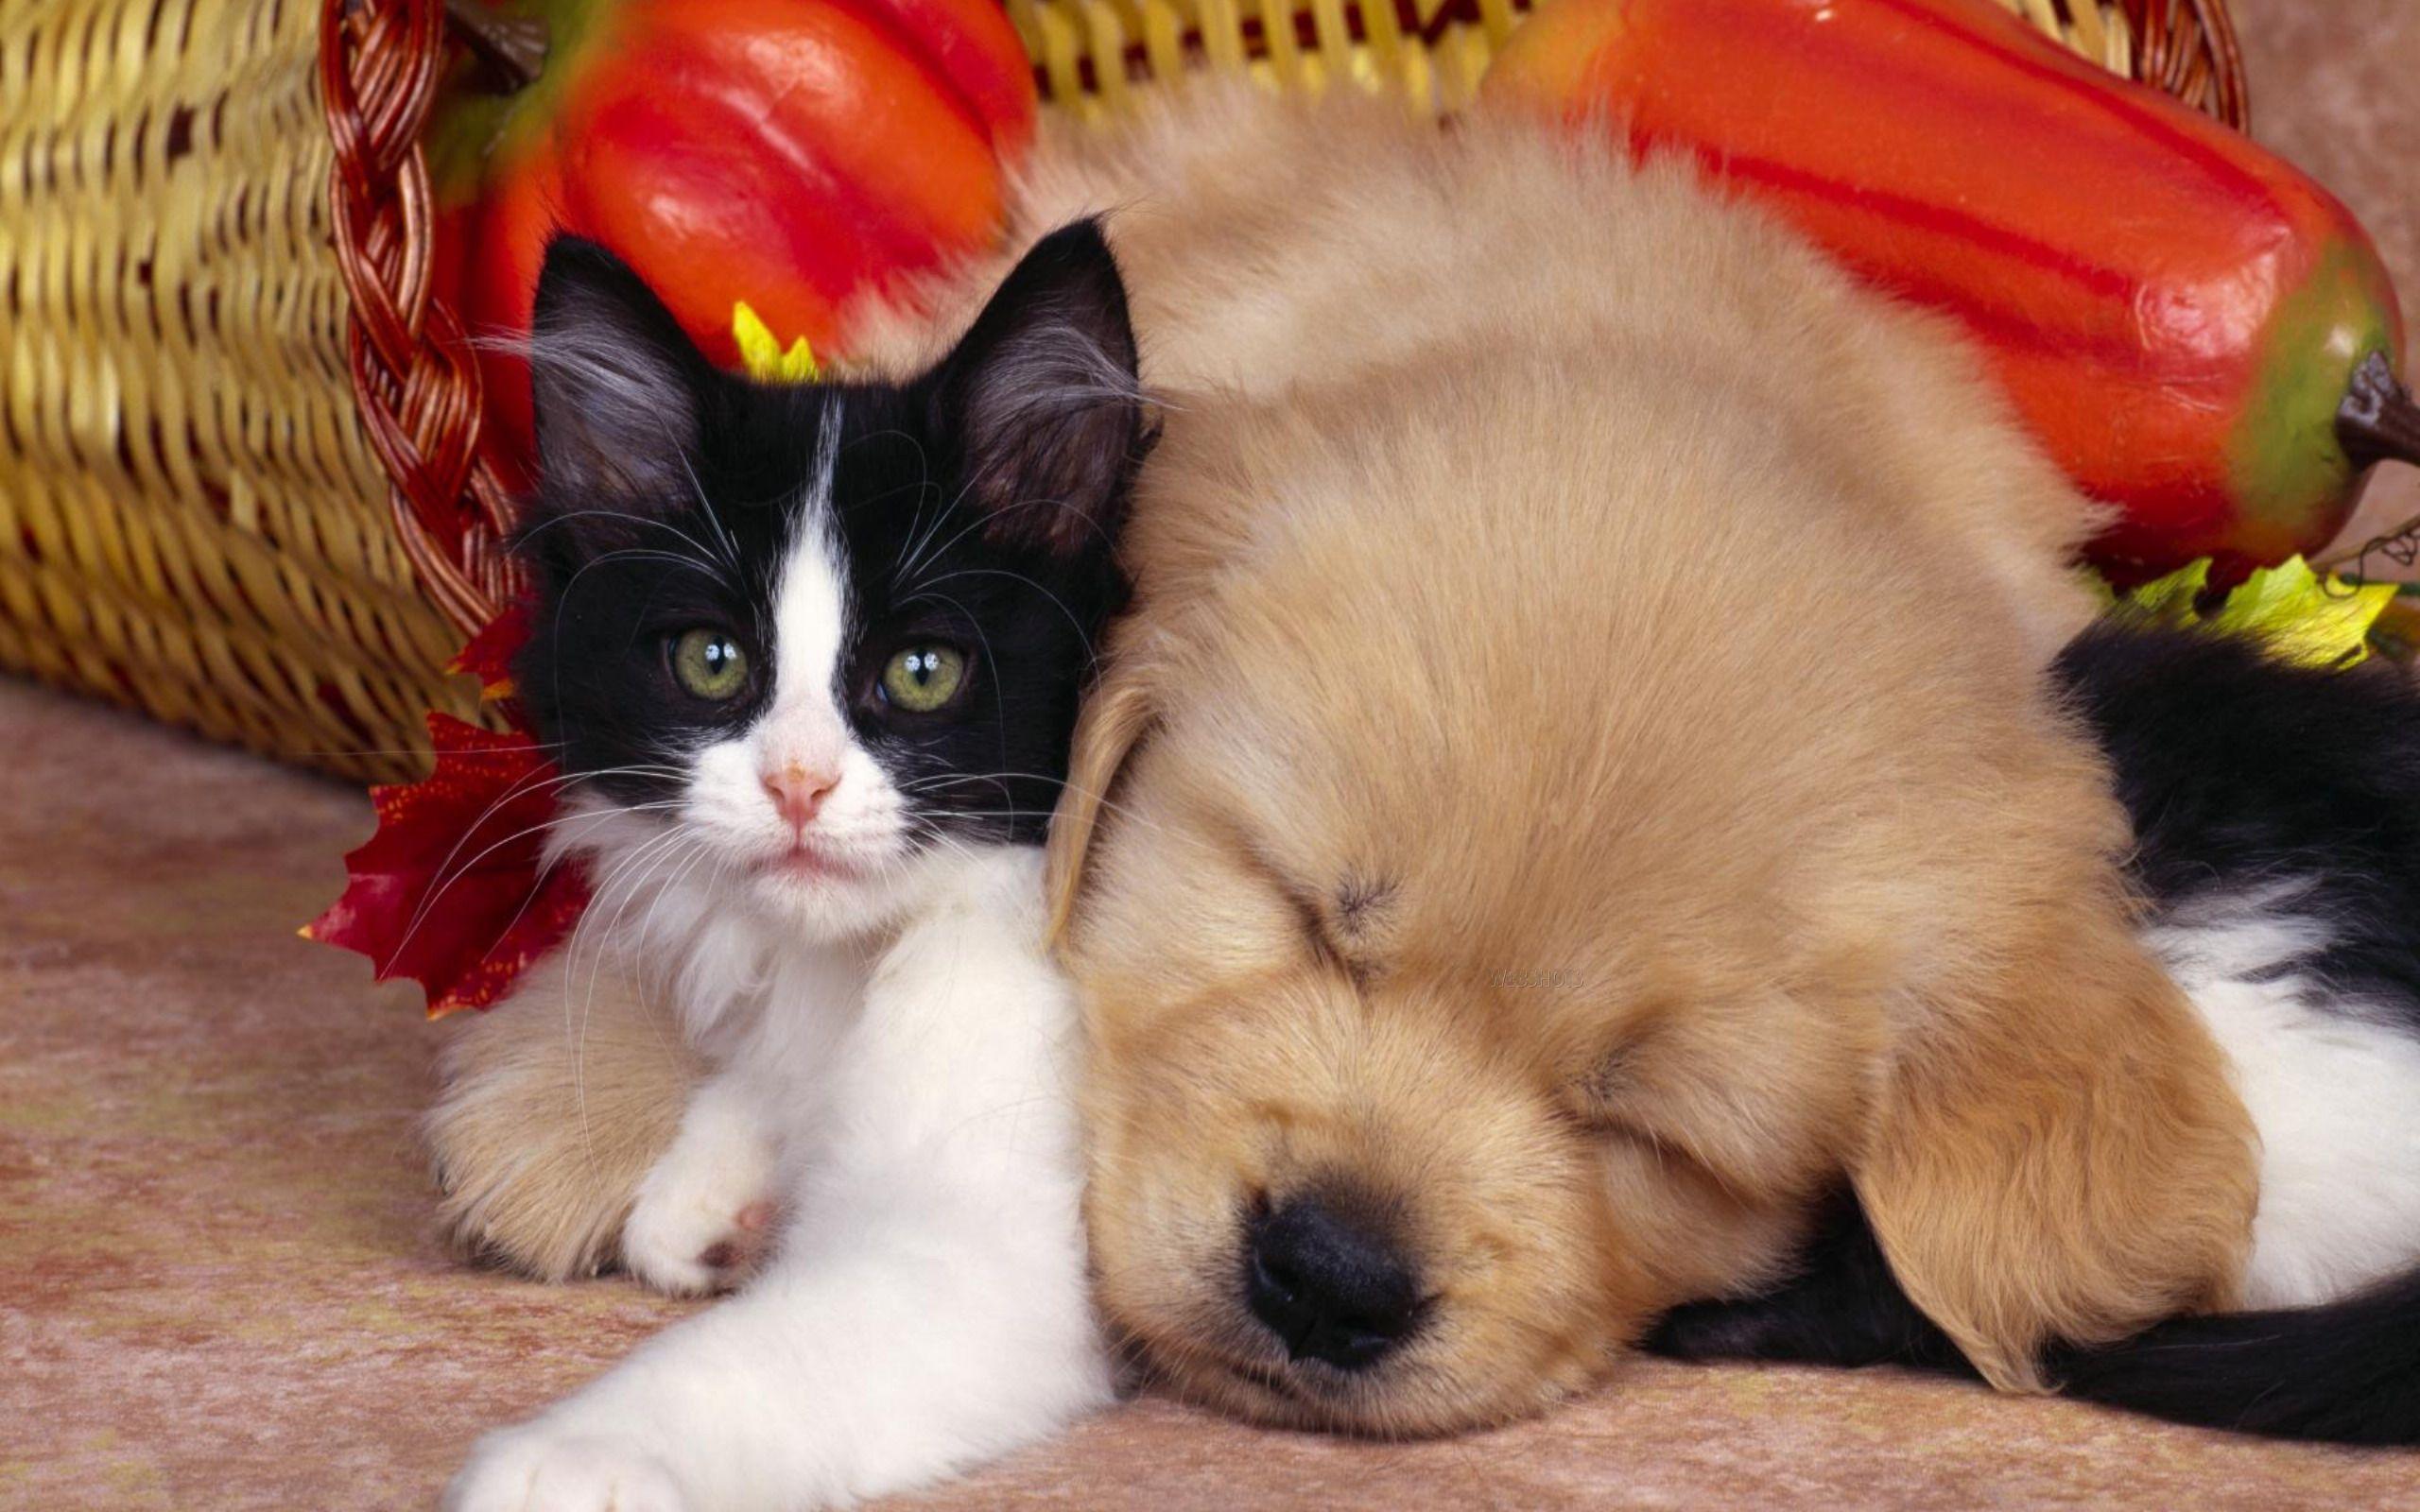 Cute Animals Wallpaper Of Black And White Cat And Dog